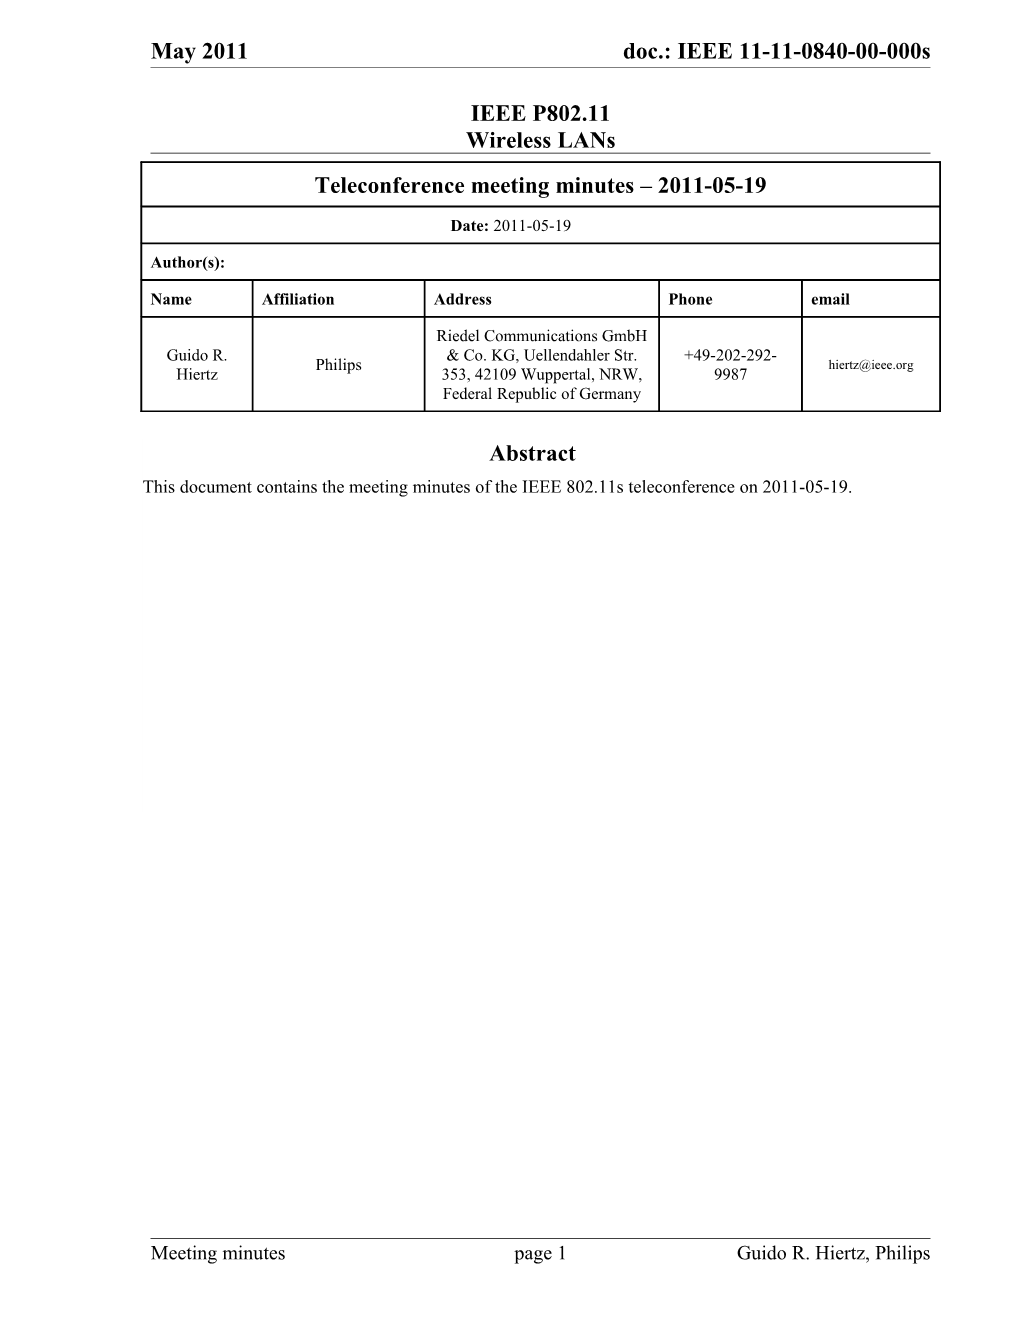 Minutes of the IEEE 802.11S Teleconference Meeting at 2011-05-19T16:00+02:00 (10:00 ET)